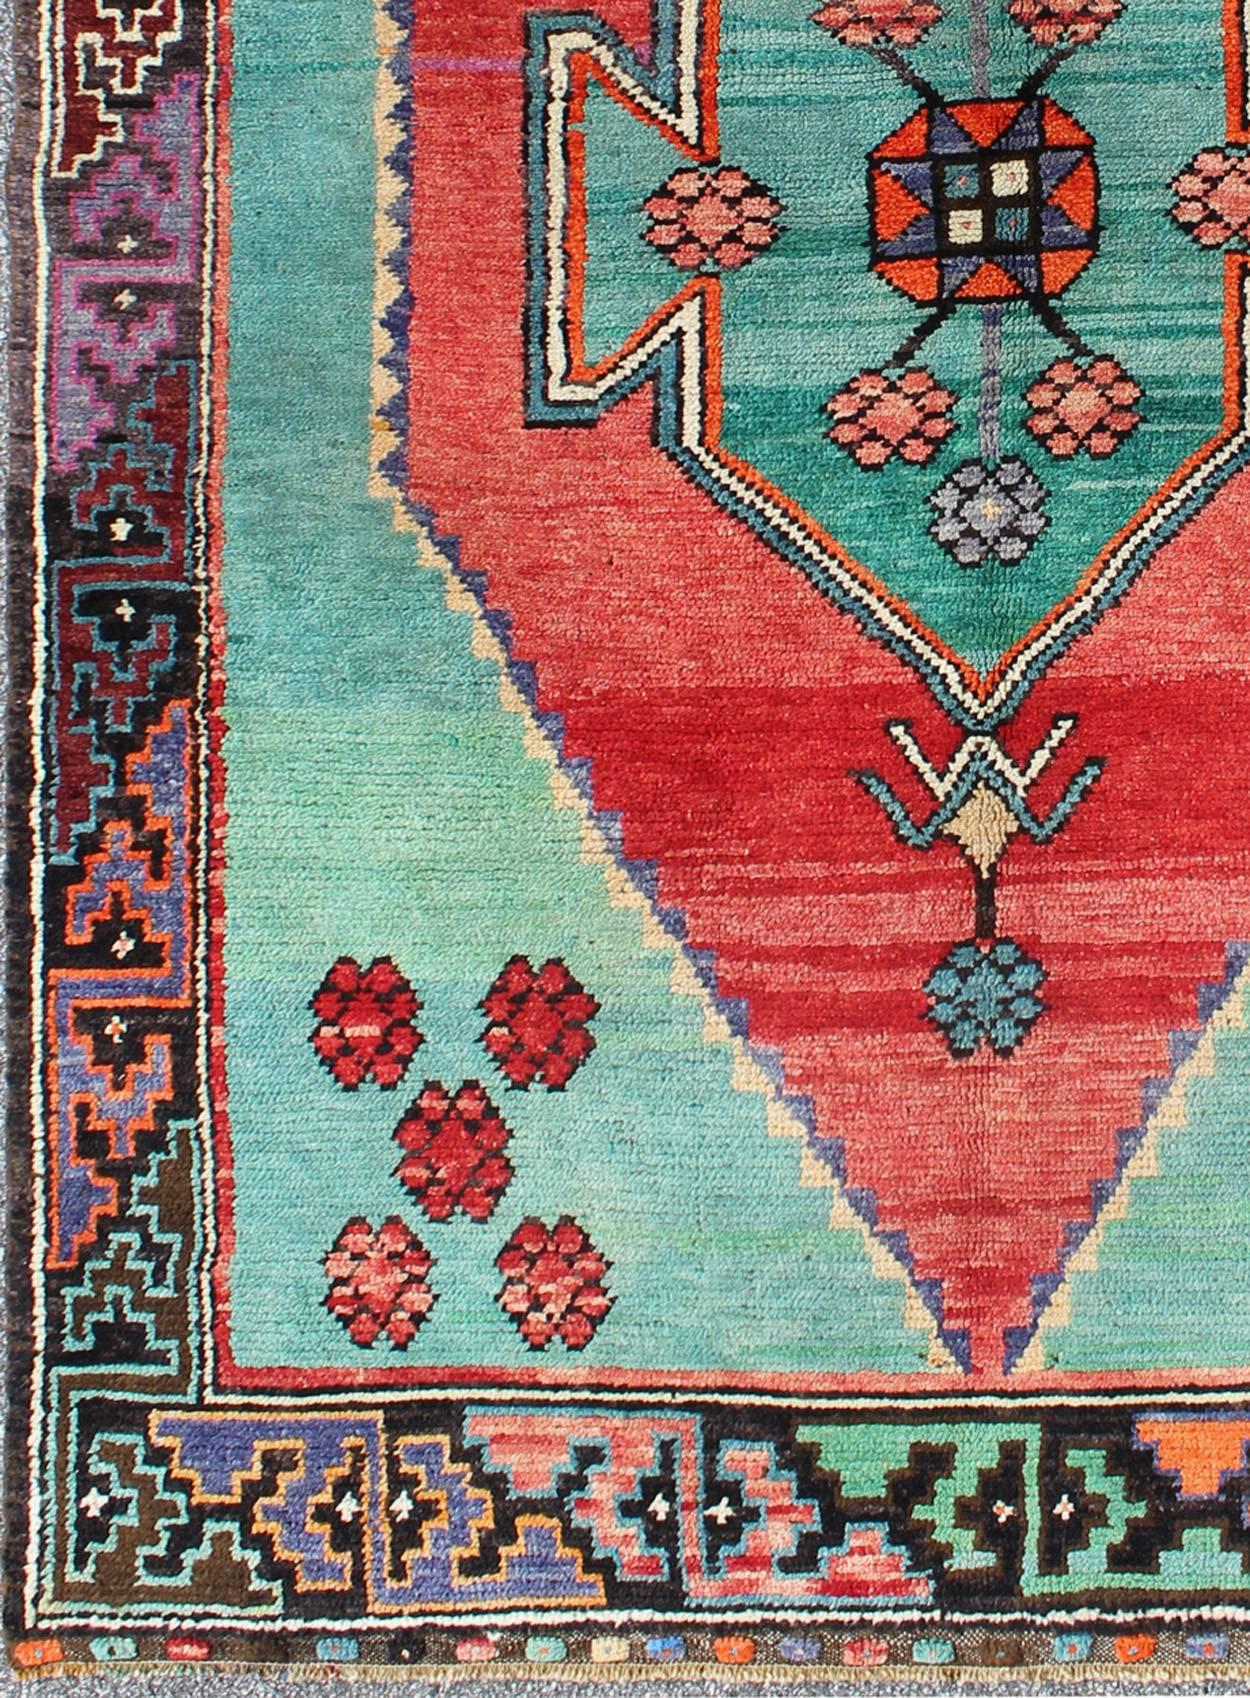 Brightly Colored Rug Oushak Turkish Vintage with Medallion and Geometric Flowers, rug tu-dur-136644, country of origin / type: Turkey / Oushak, circa 1940

This beautiful vintage rug from mid-20th century Turkey features an intricate design, which